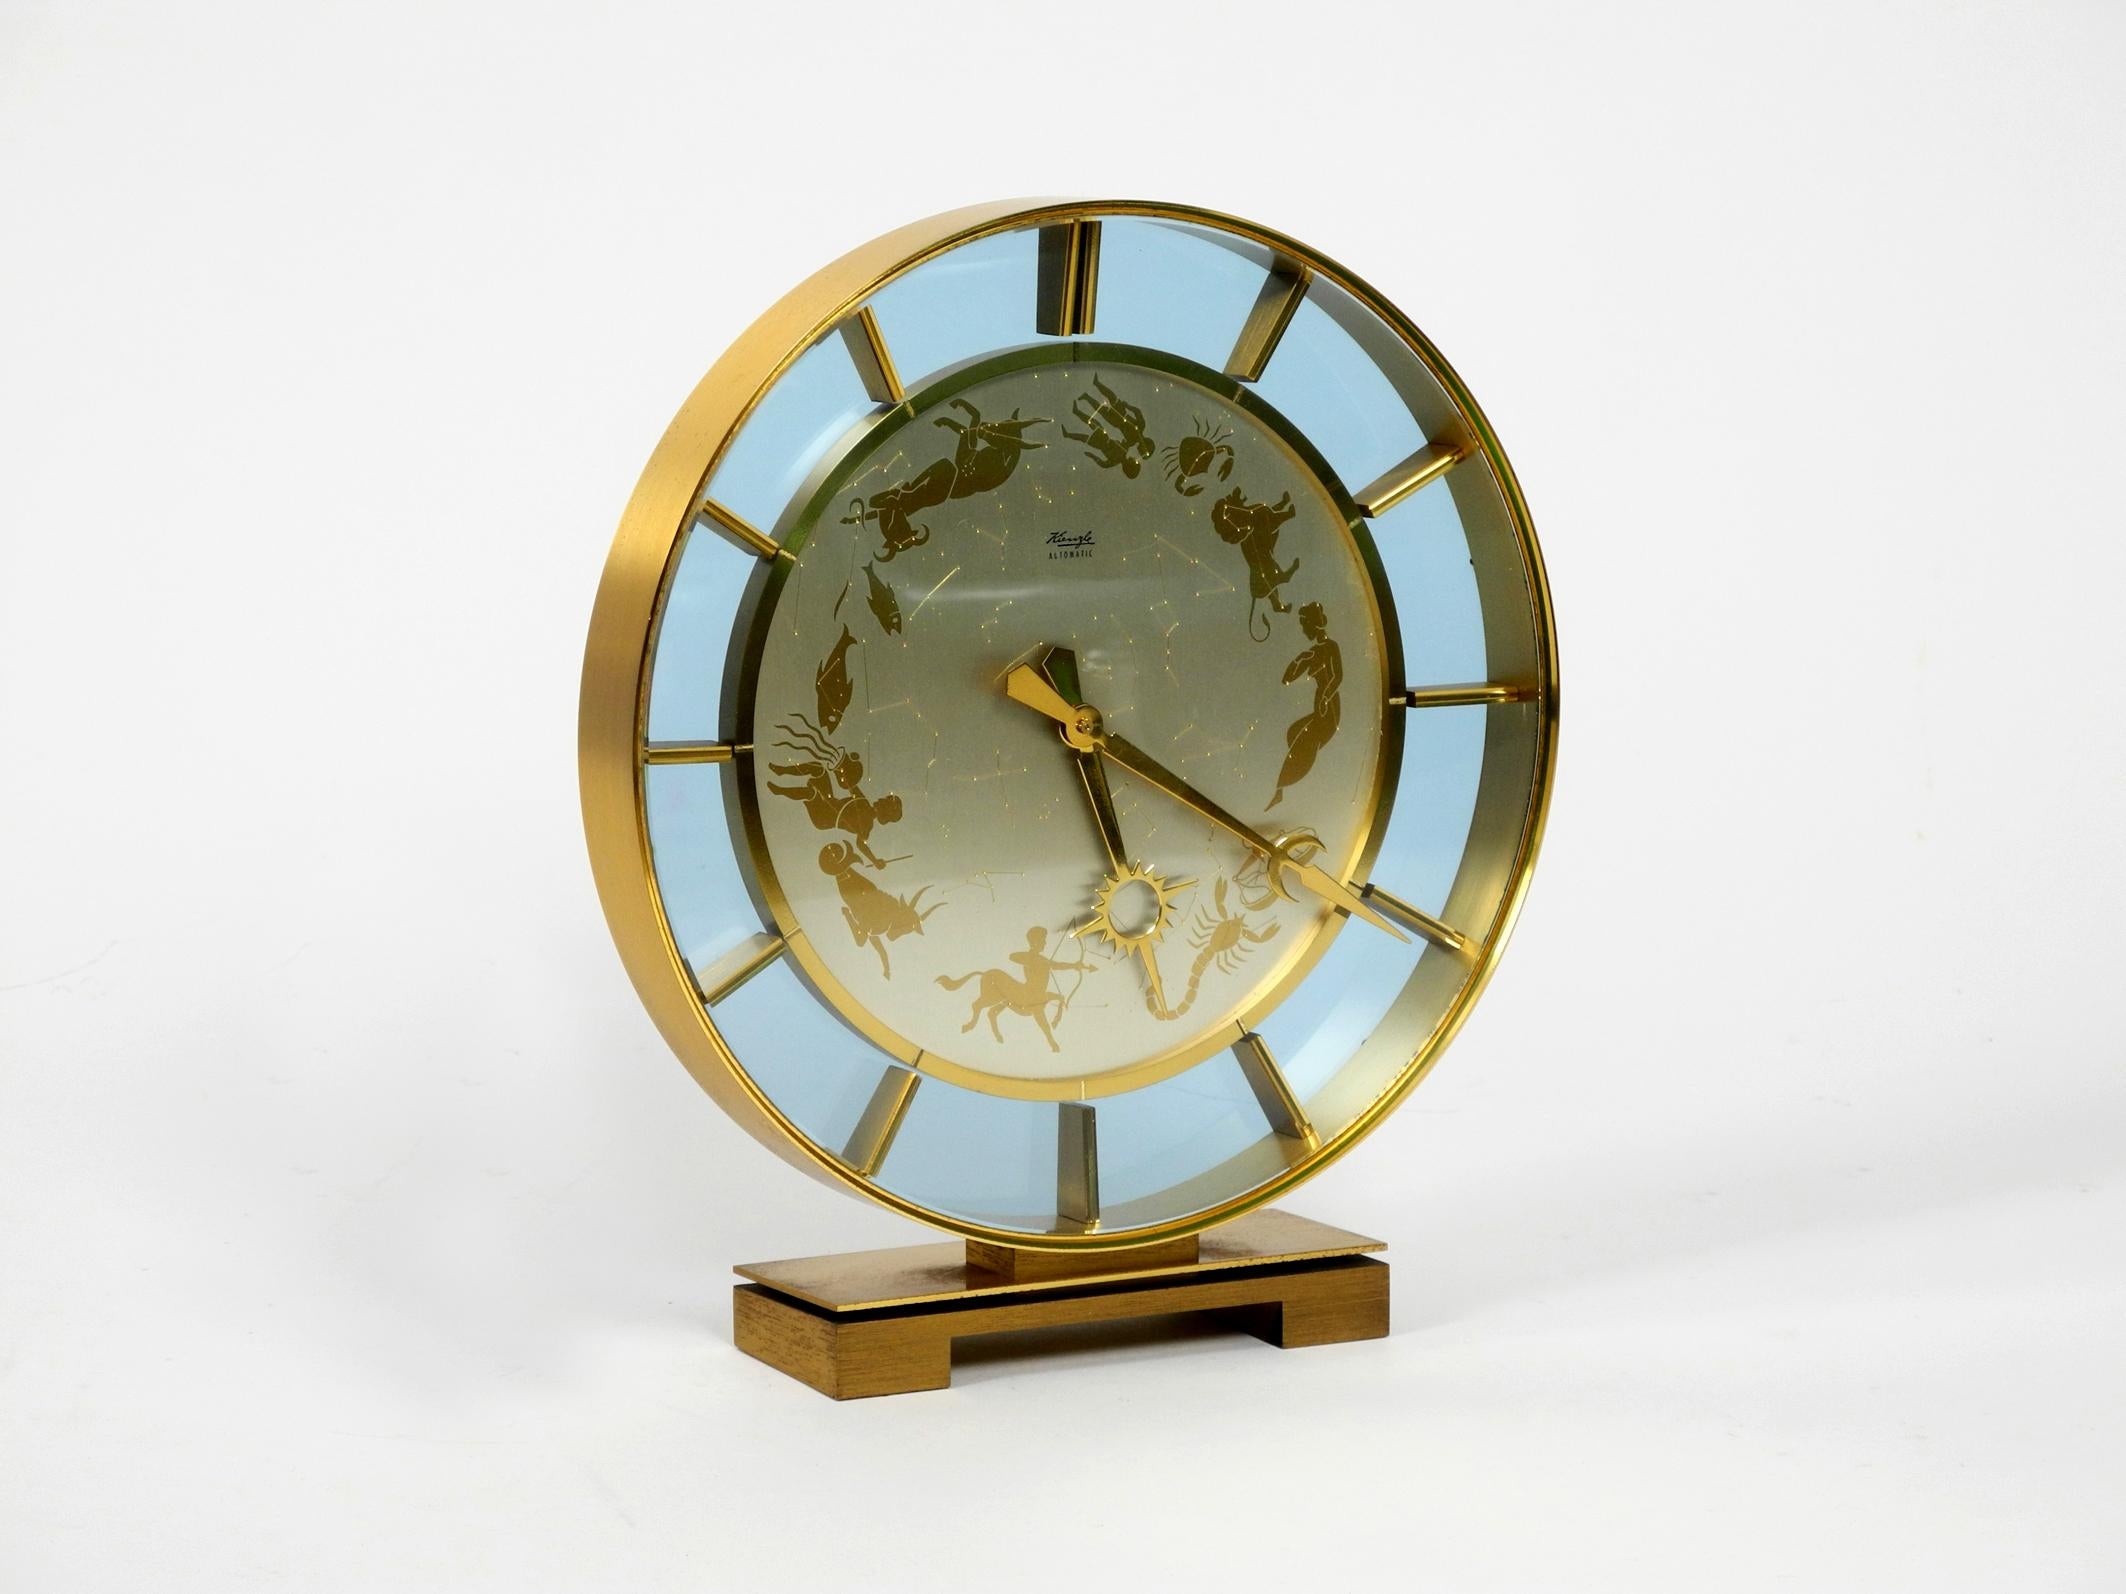 Rare beautiful 1970s big Kienzle Zodiac table clock made of heavy brass.
Great elegant very high quality design with many details.
All made of brass, front with a glass pane, back made of plastic.
Battery powered. 100% original condition. Fully